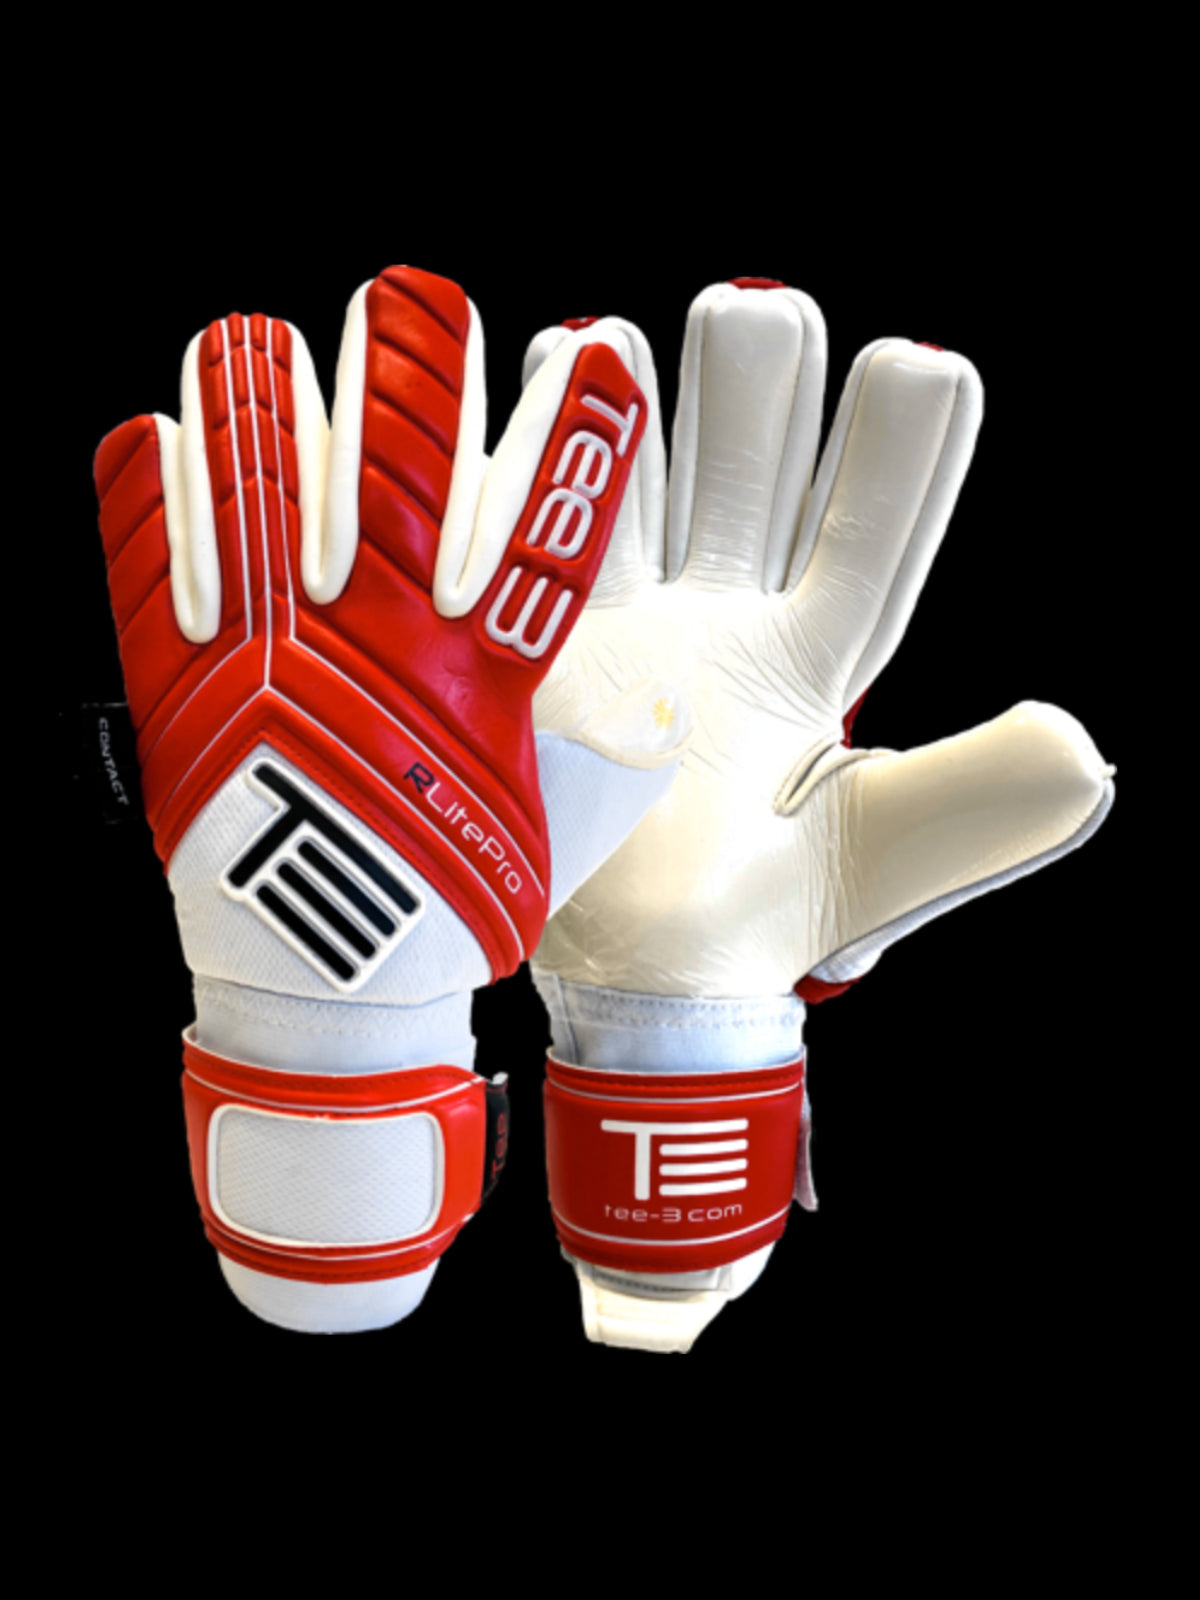 A goalkeeping glove worn by professional goalkeepers